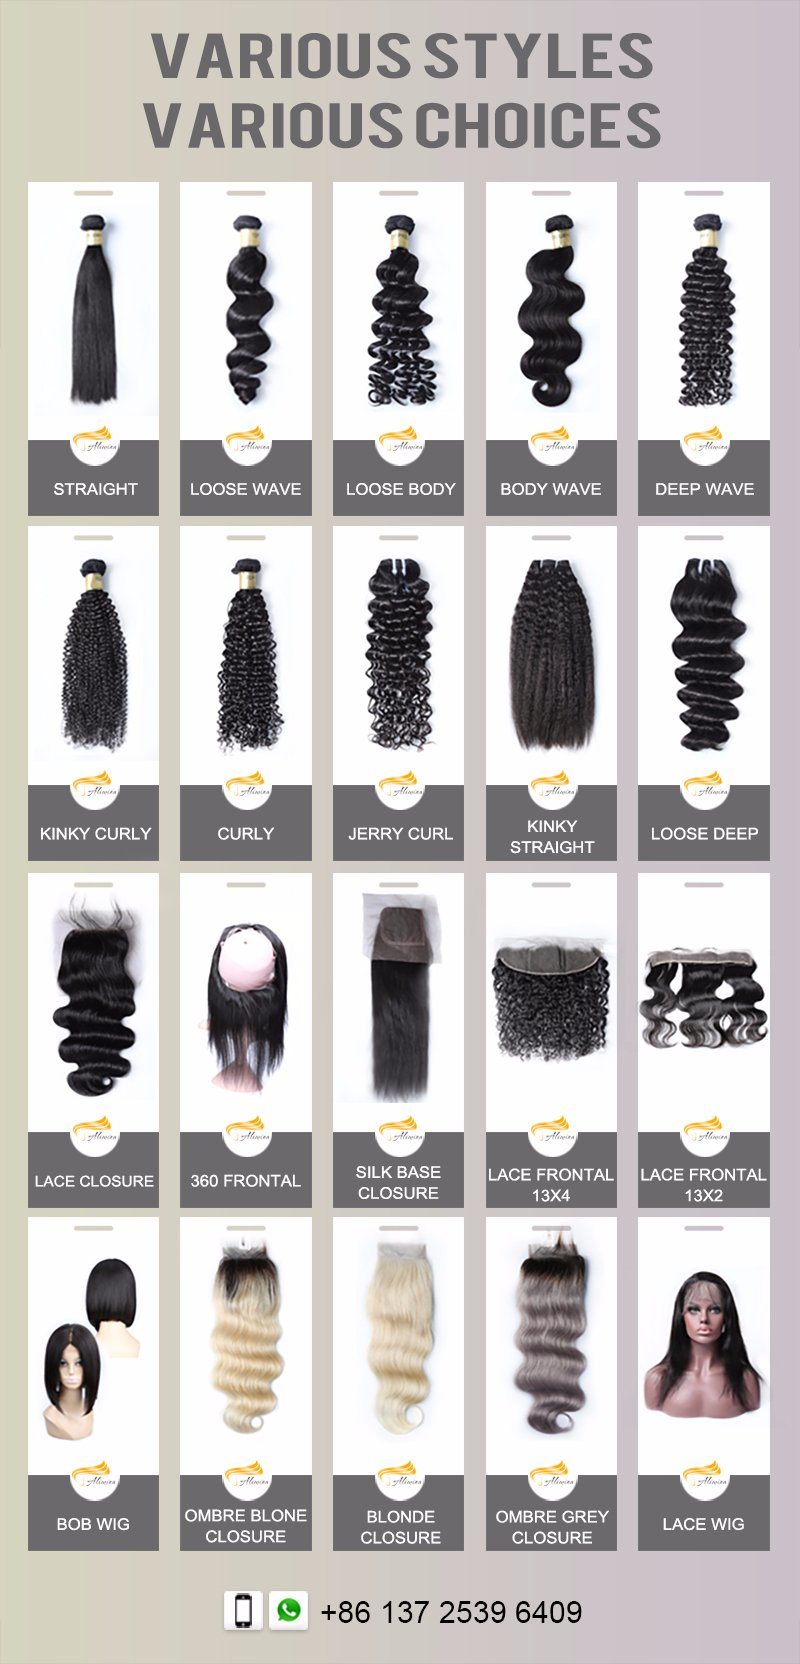 Stock in 24 Hours Brazilian Hair Made in China